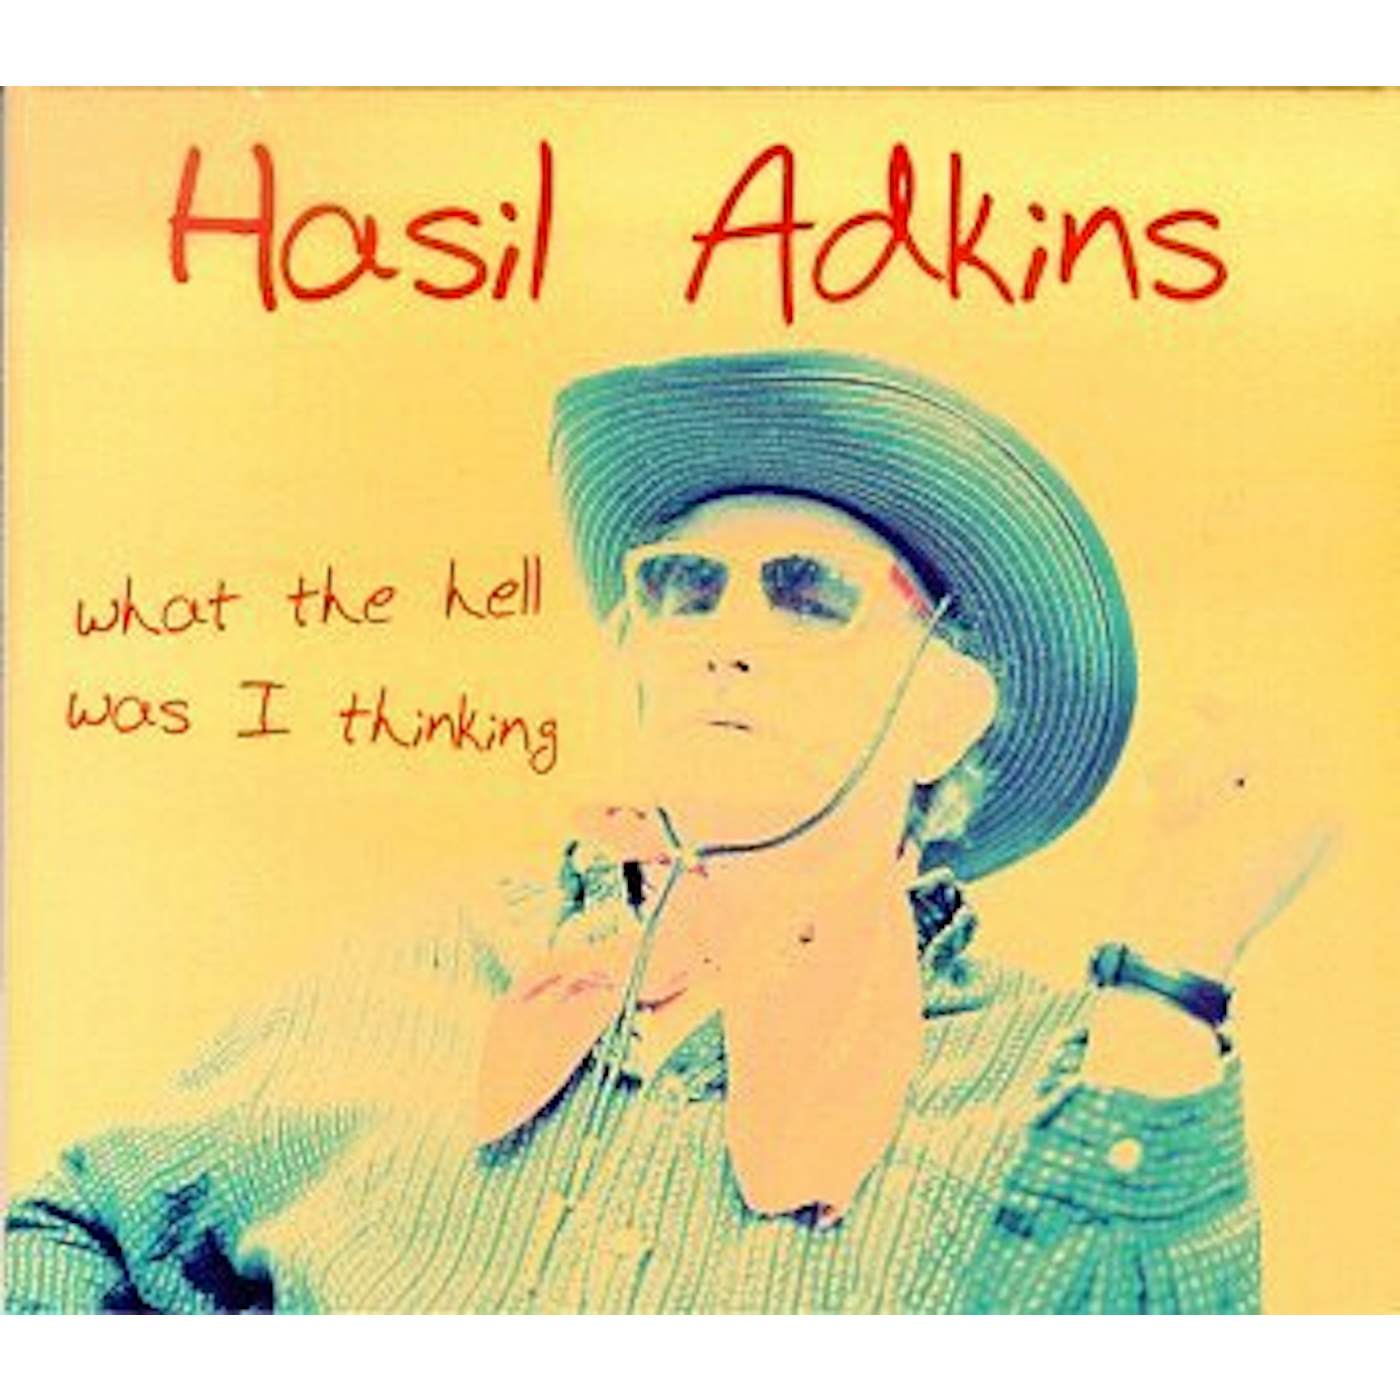 Hasil Adkins WHAT THE HELL WAS I THINKING CD